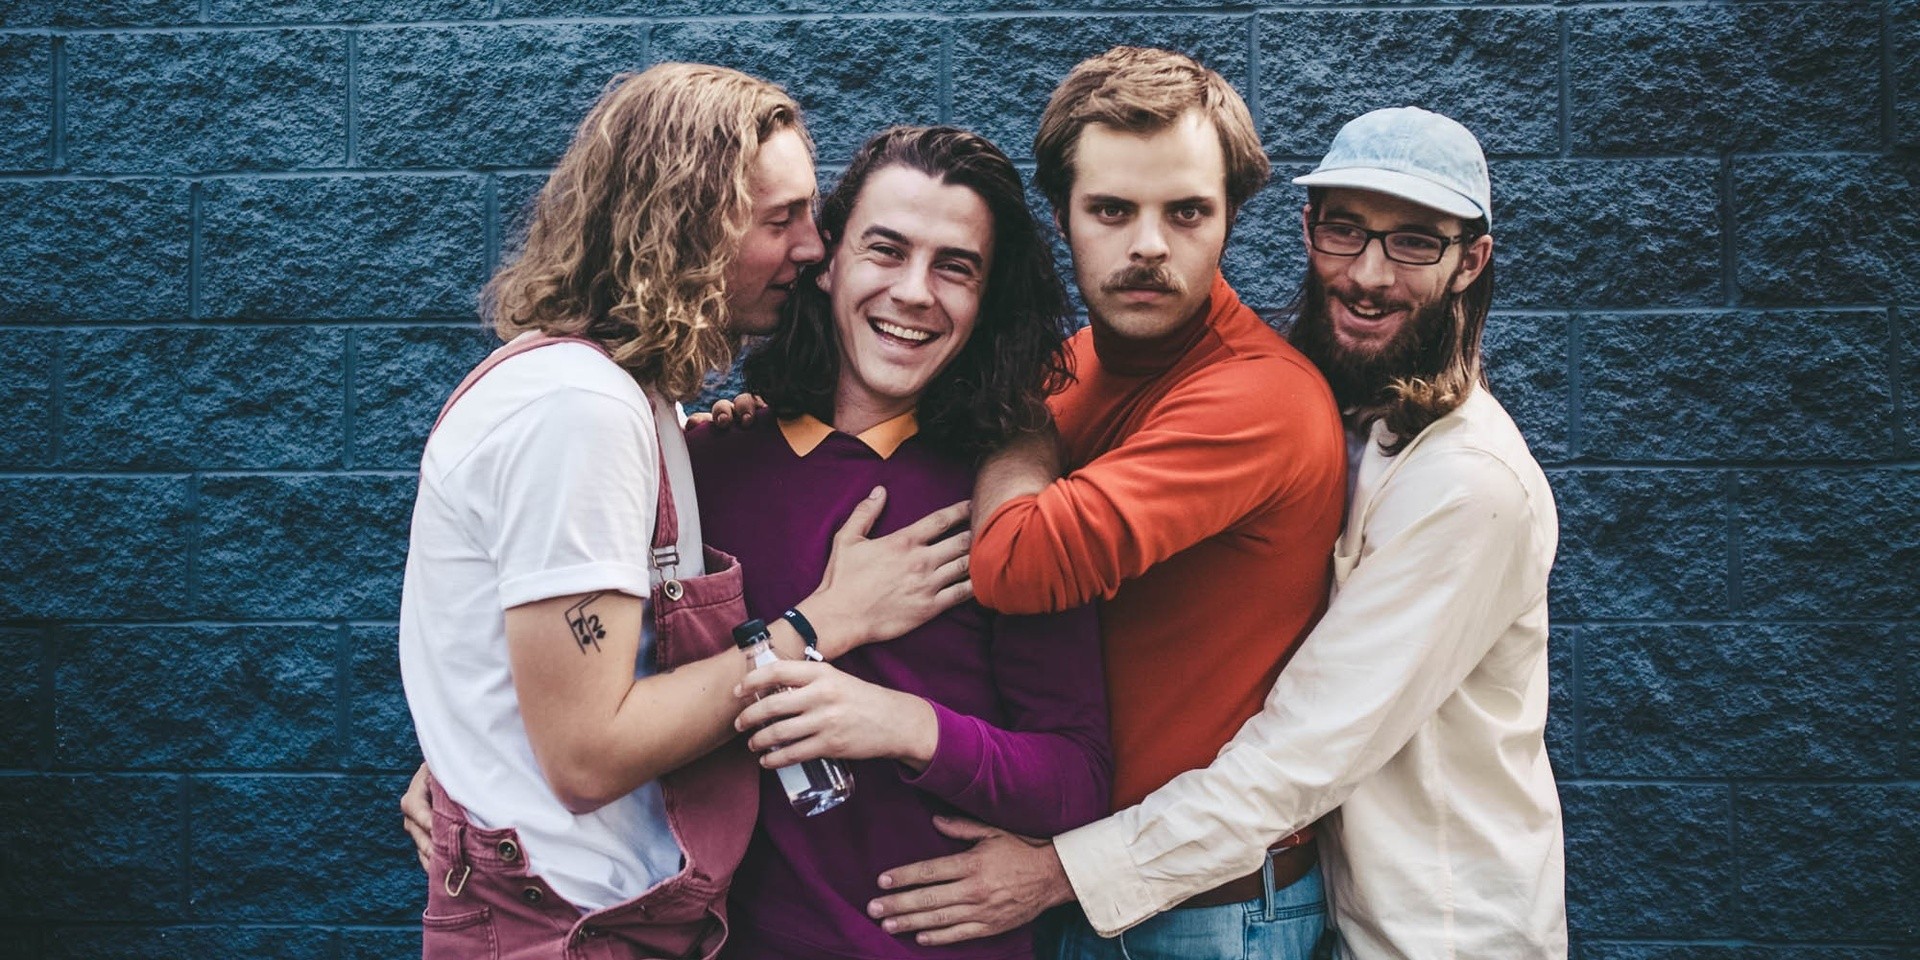 Peach Pit to perform in Singapore